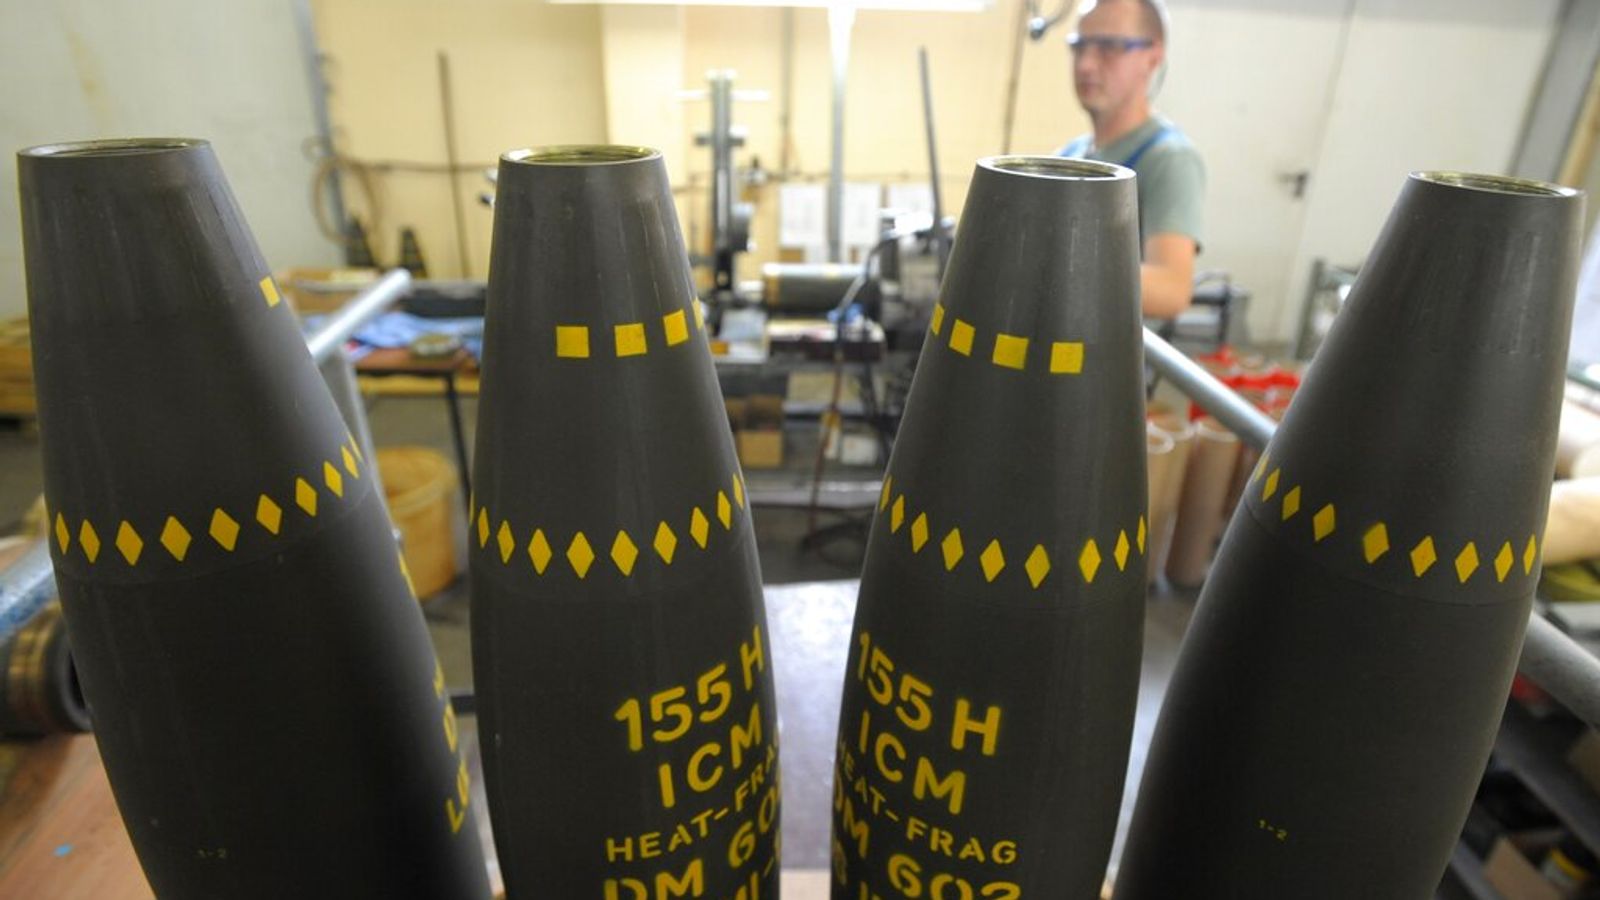 US agrees to send controversial cluster munitions to Ukraine